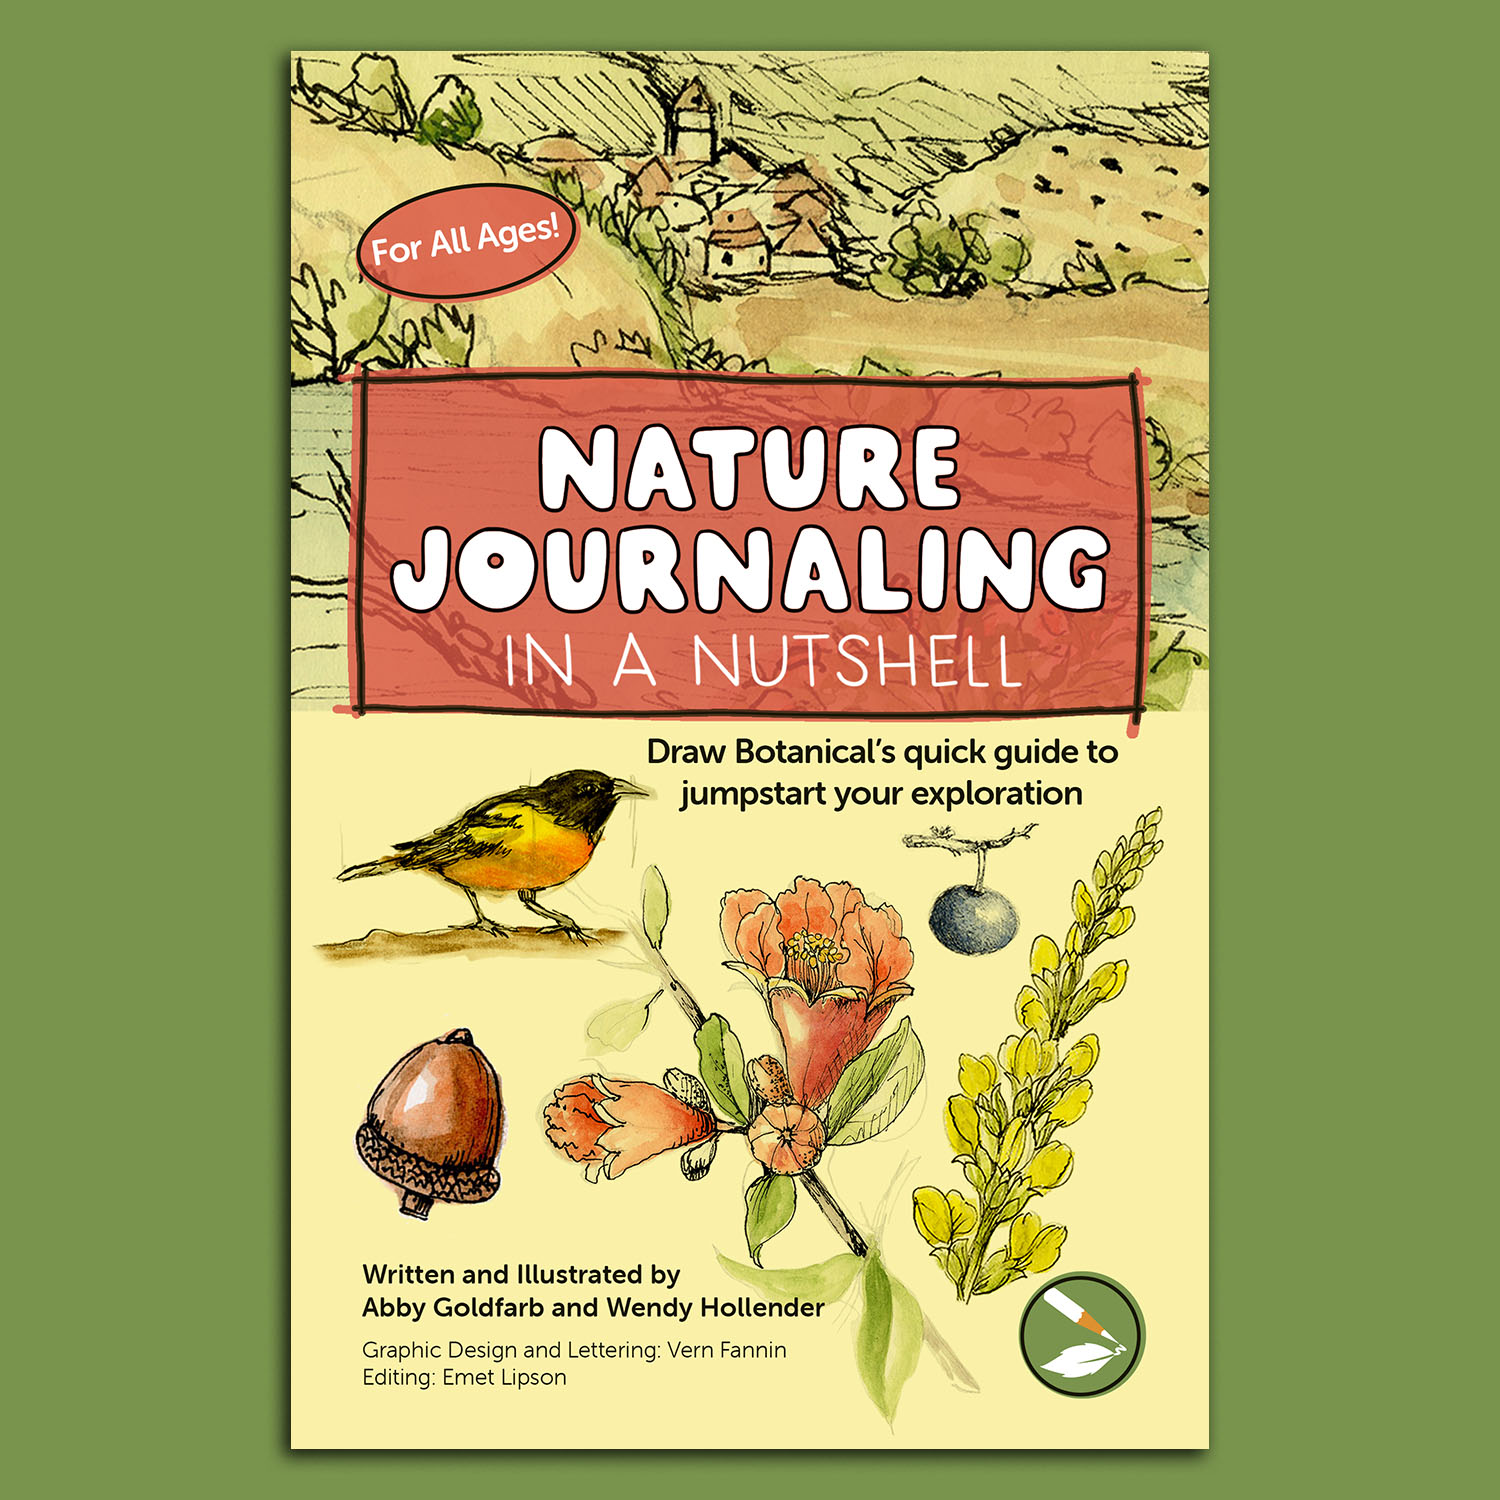 https://drawbotanical.com/wp-content/uploads/db_product_nature_journaling_quick_guide_printed_sq.jpg